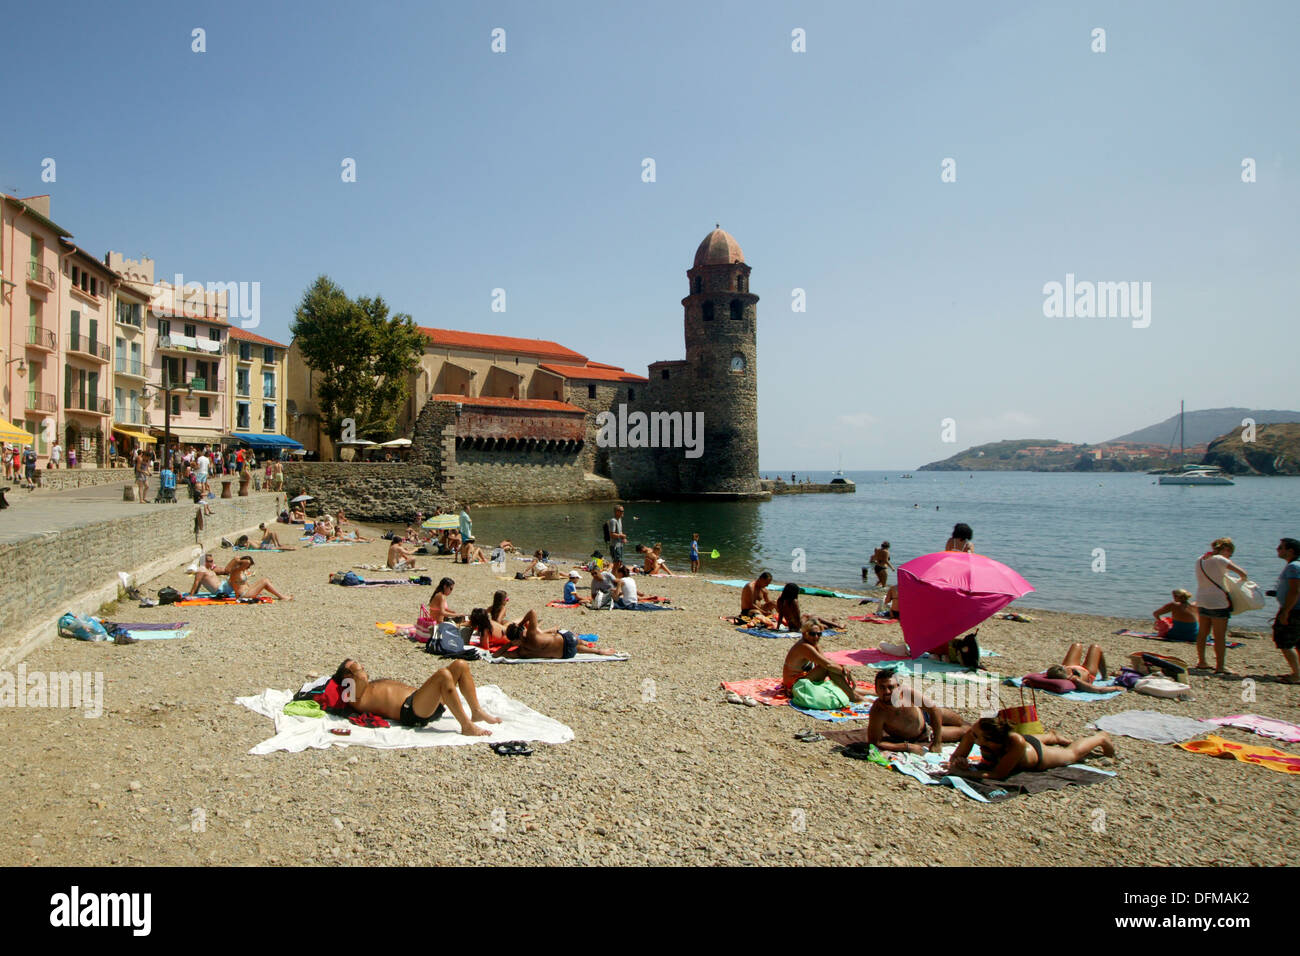 small public beach in the town of Collioure, Languedoc Roussillon, South of France Stock Photo